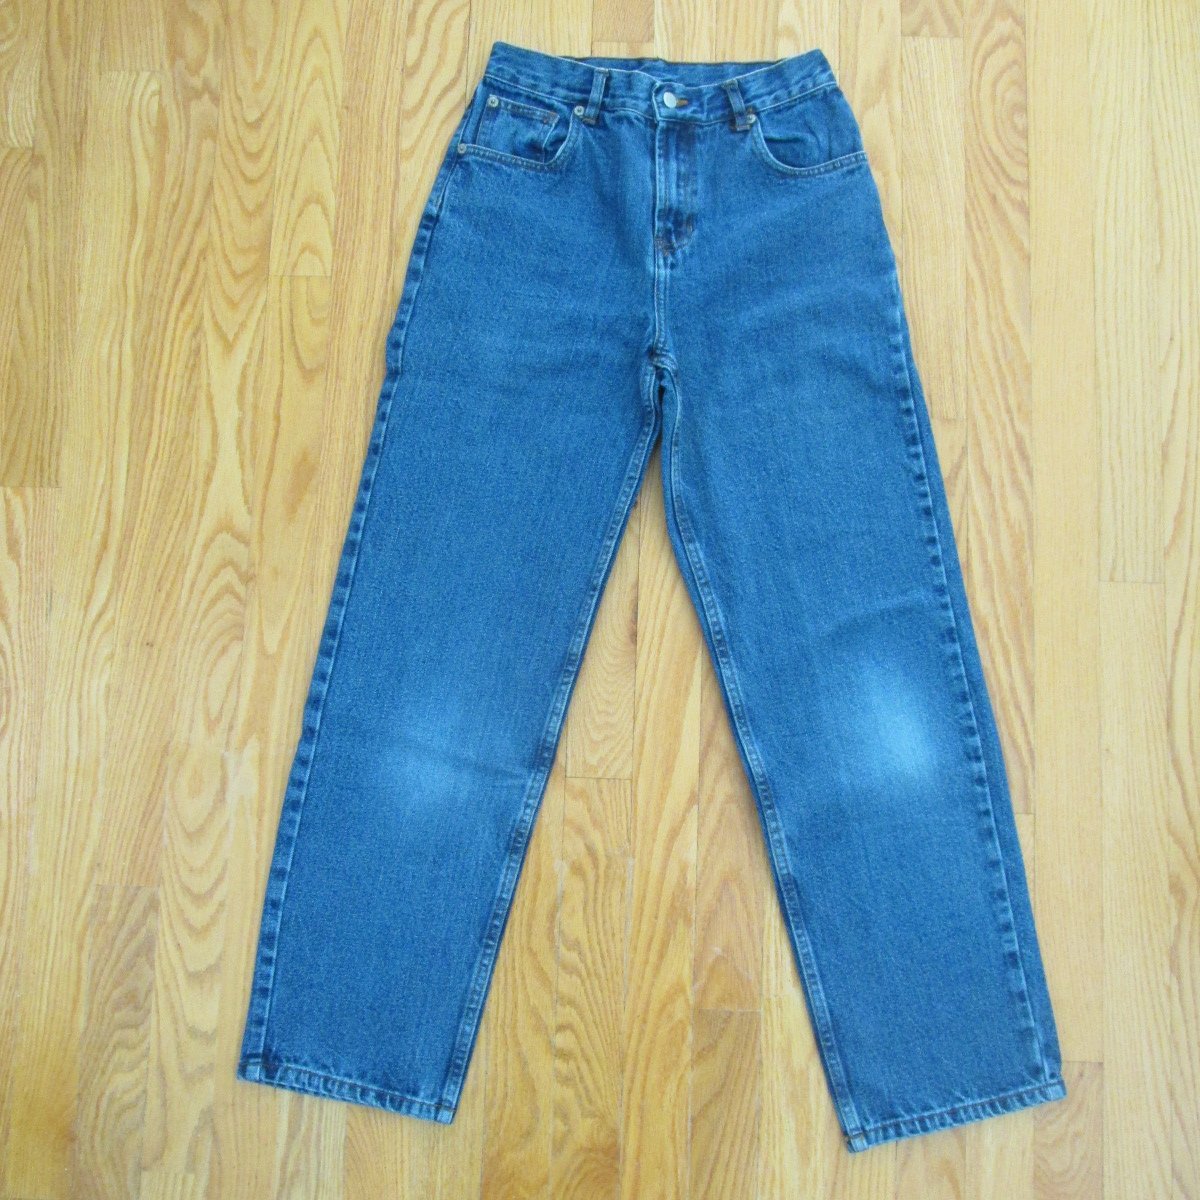 CANYON RIVER BLUES GIRL'S SIZE 14 JEANS STONE WASHED STRAIGHT LEG ...